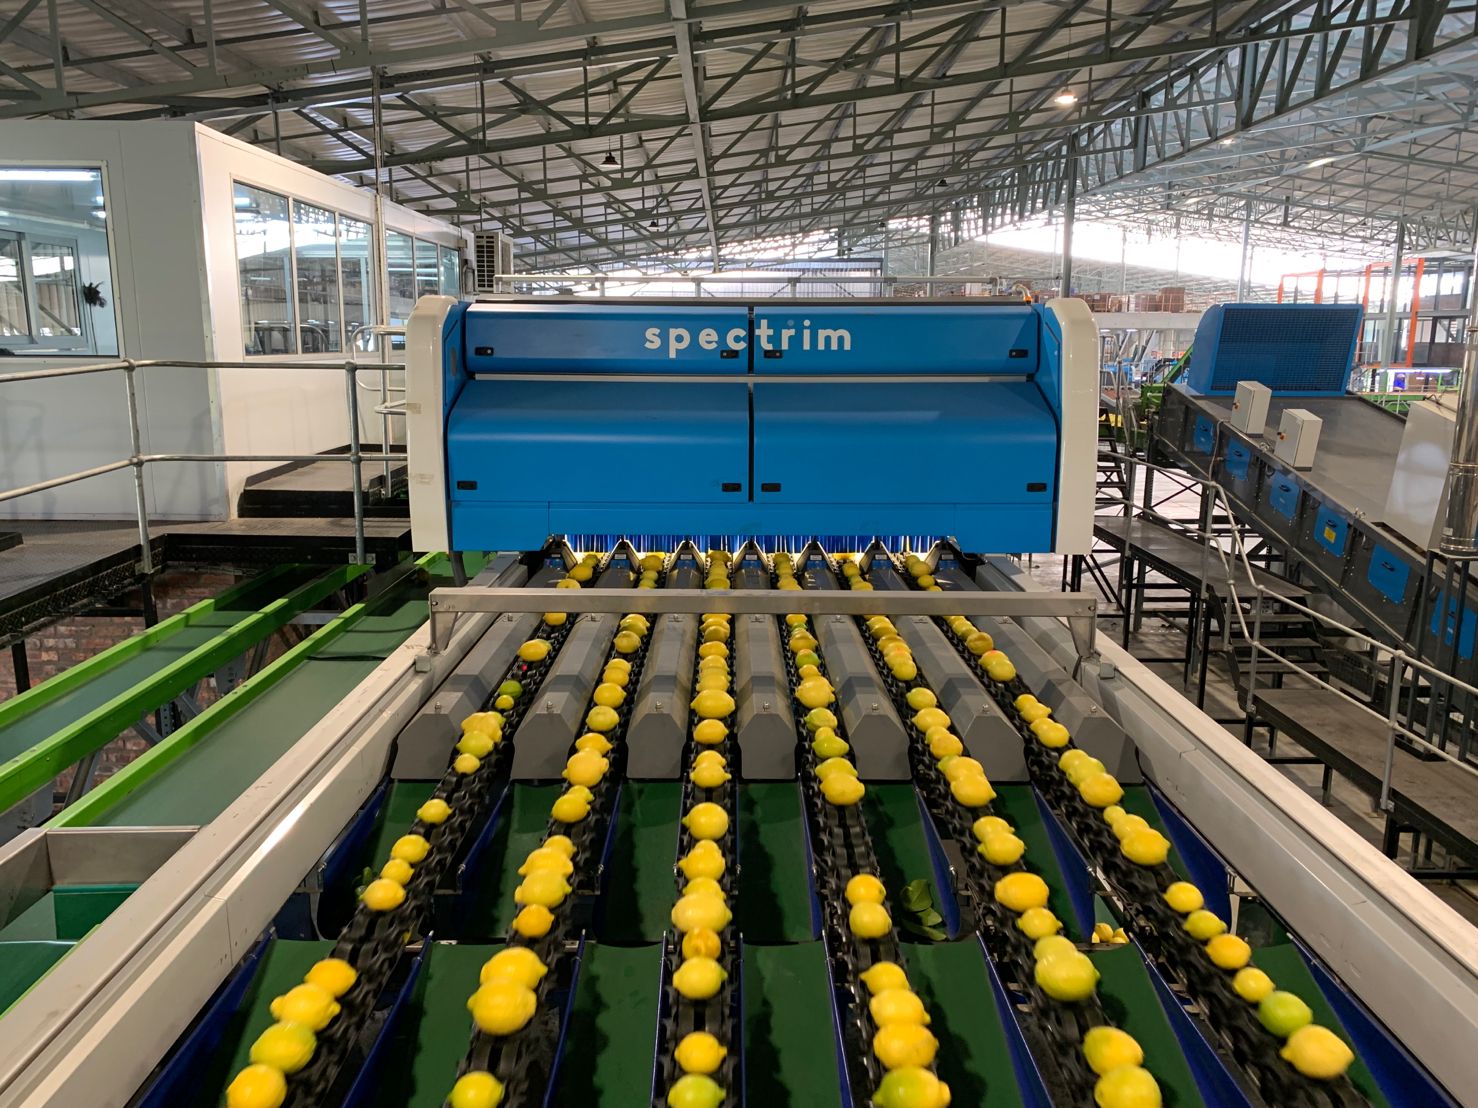 CITRUS LEADER SITRUSRAND EXPANDS ITS CAPACITY AND OPENS UP NEW SELLING OPPORTUNITIES WITH TOMRA’S SPECTRIM AND INPECTRA² PLATFORMS